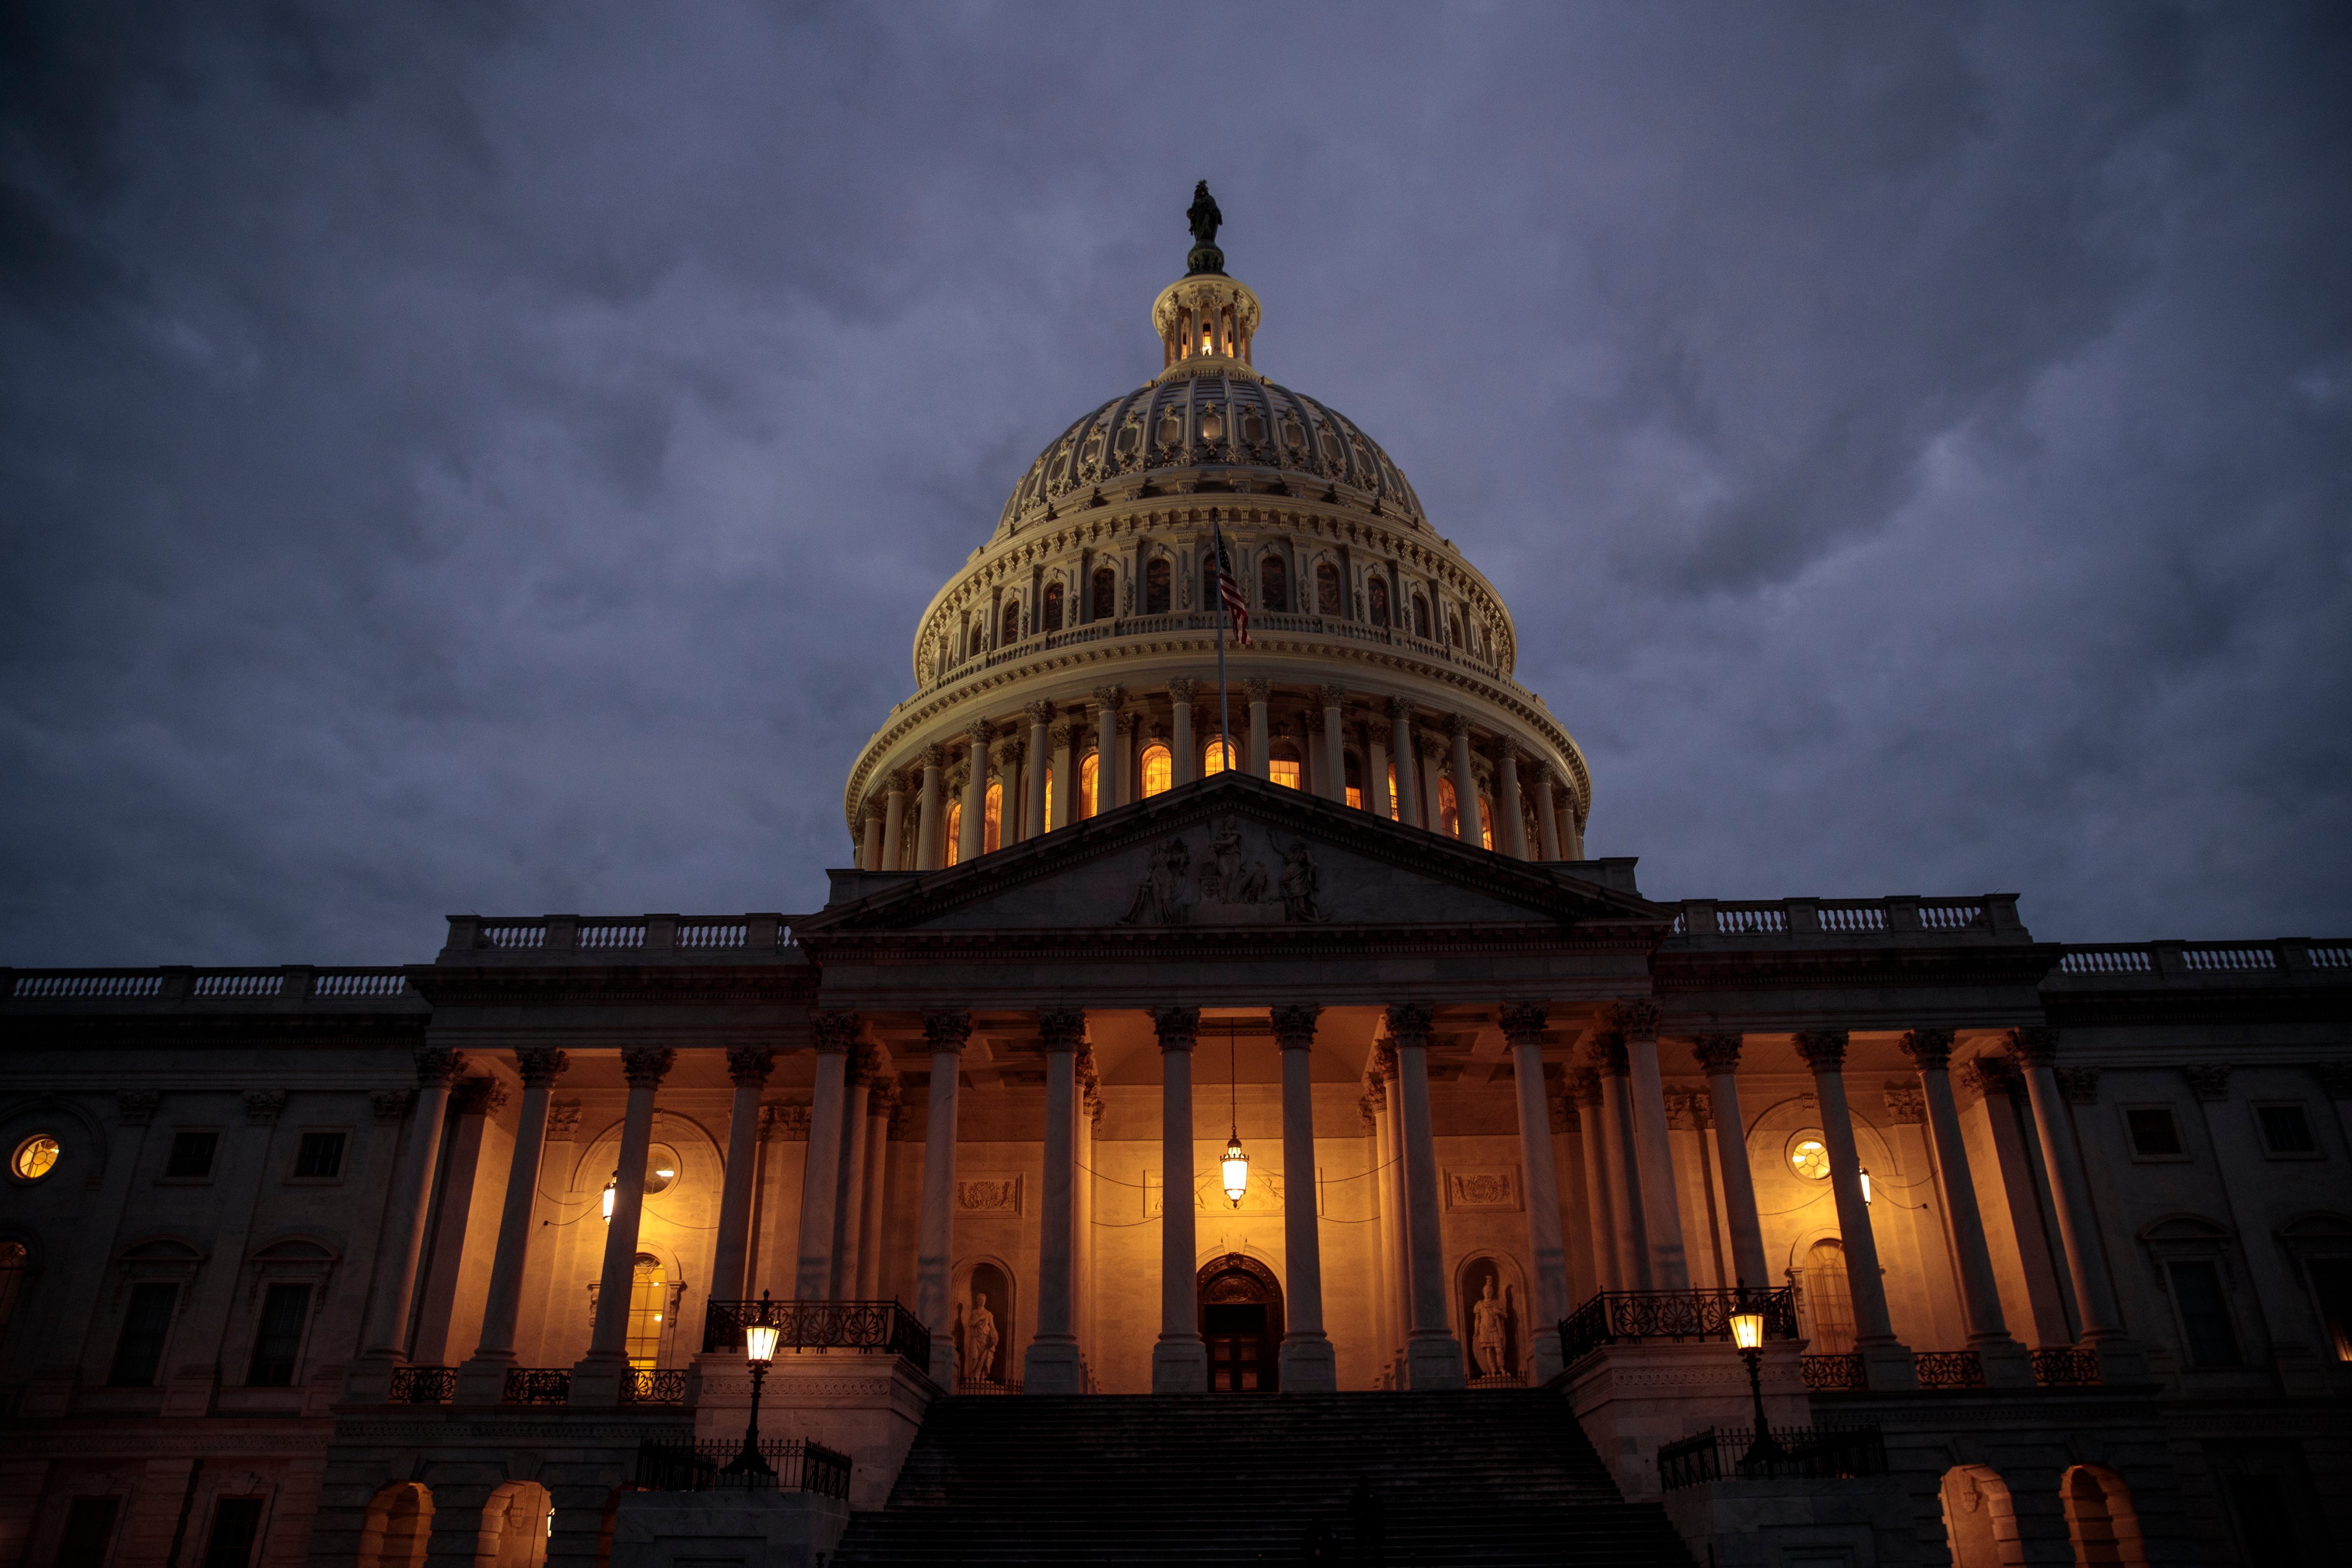 WASHINGTON, DC - JANUARY 21:  The U.S. Capitol is seen at dusk, January 21, 2018 in Washington, DC. Lawmakers are convening for a Sunday session to try to resolve the government shutdown. (Photo by Drew Angerer/Getty Images) (Drew Angerer&mdash;Getty Images)